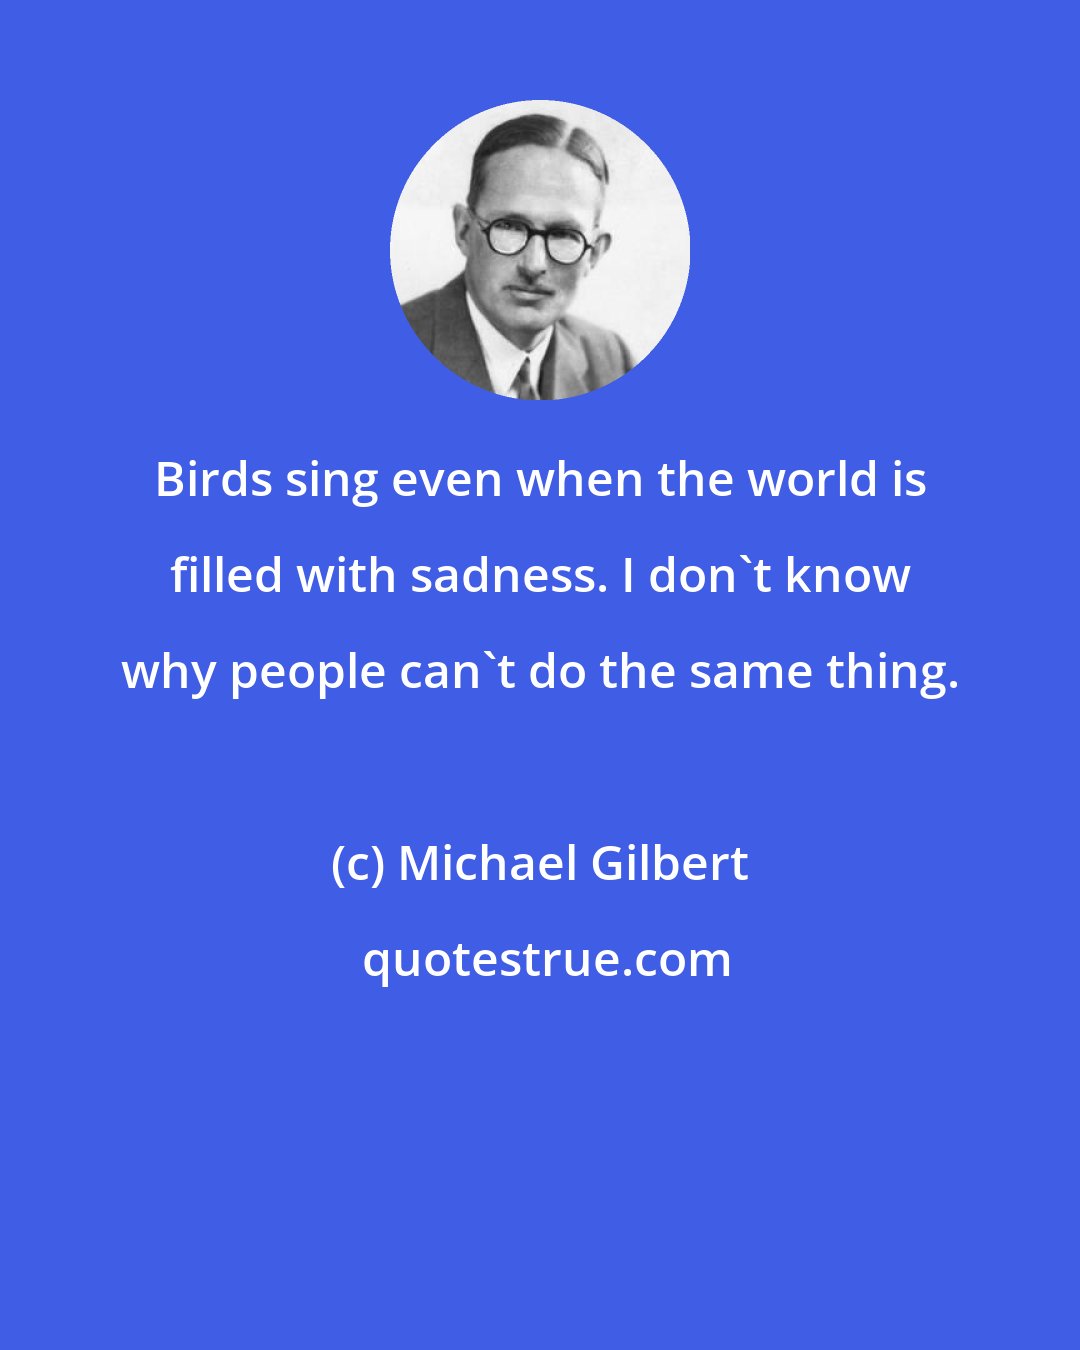 Michael Gilbert: Birds sing even when the world is filled with sadness. I don't know why people can't do the same thing.